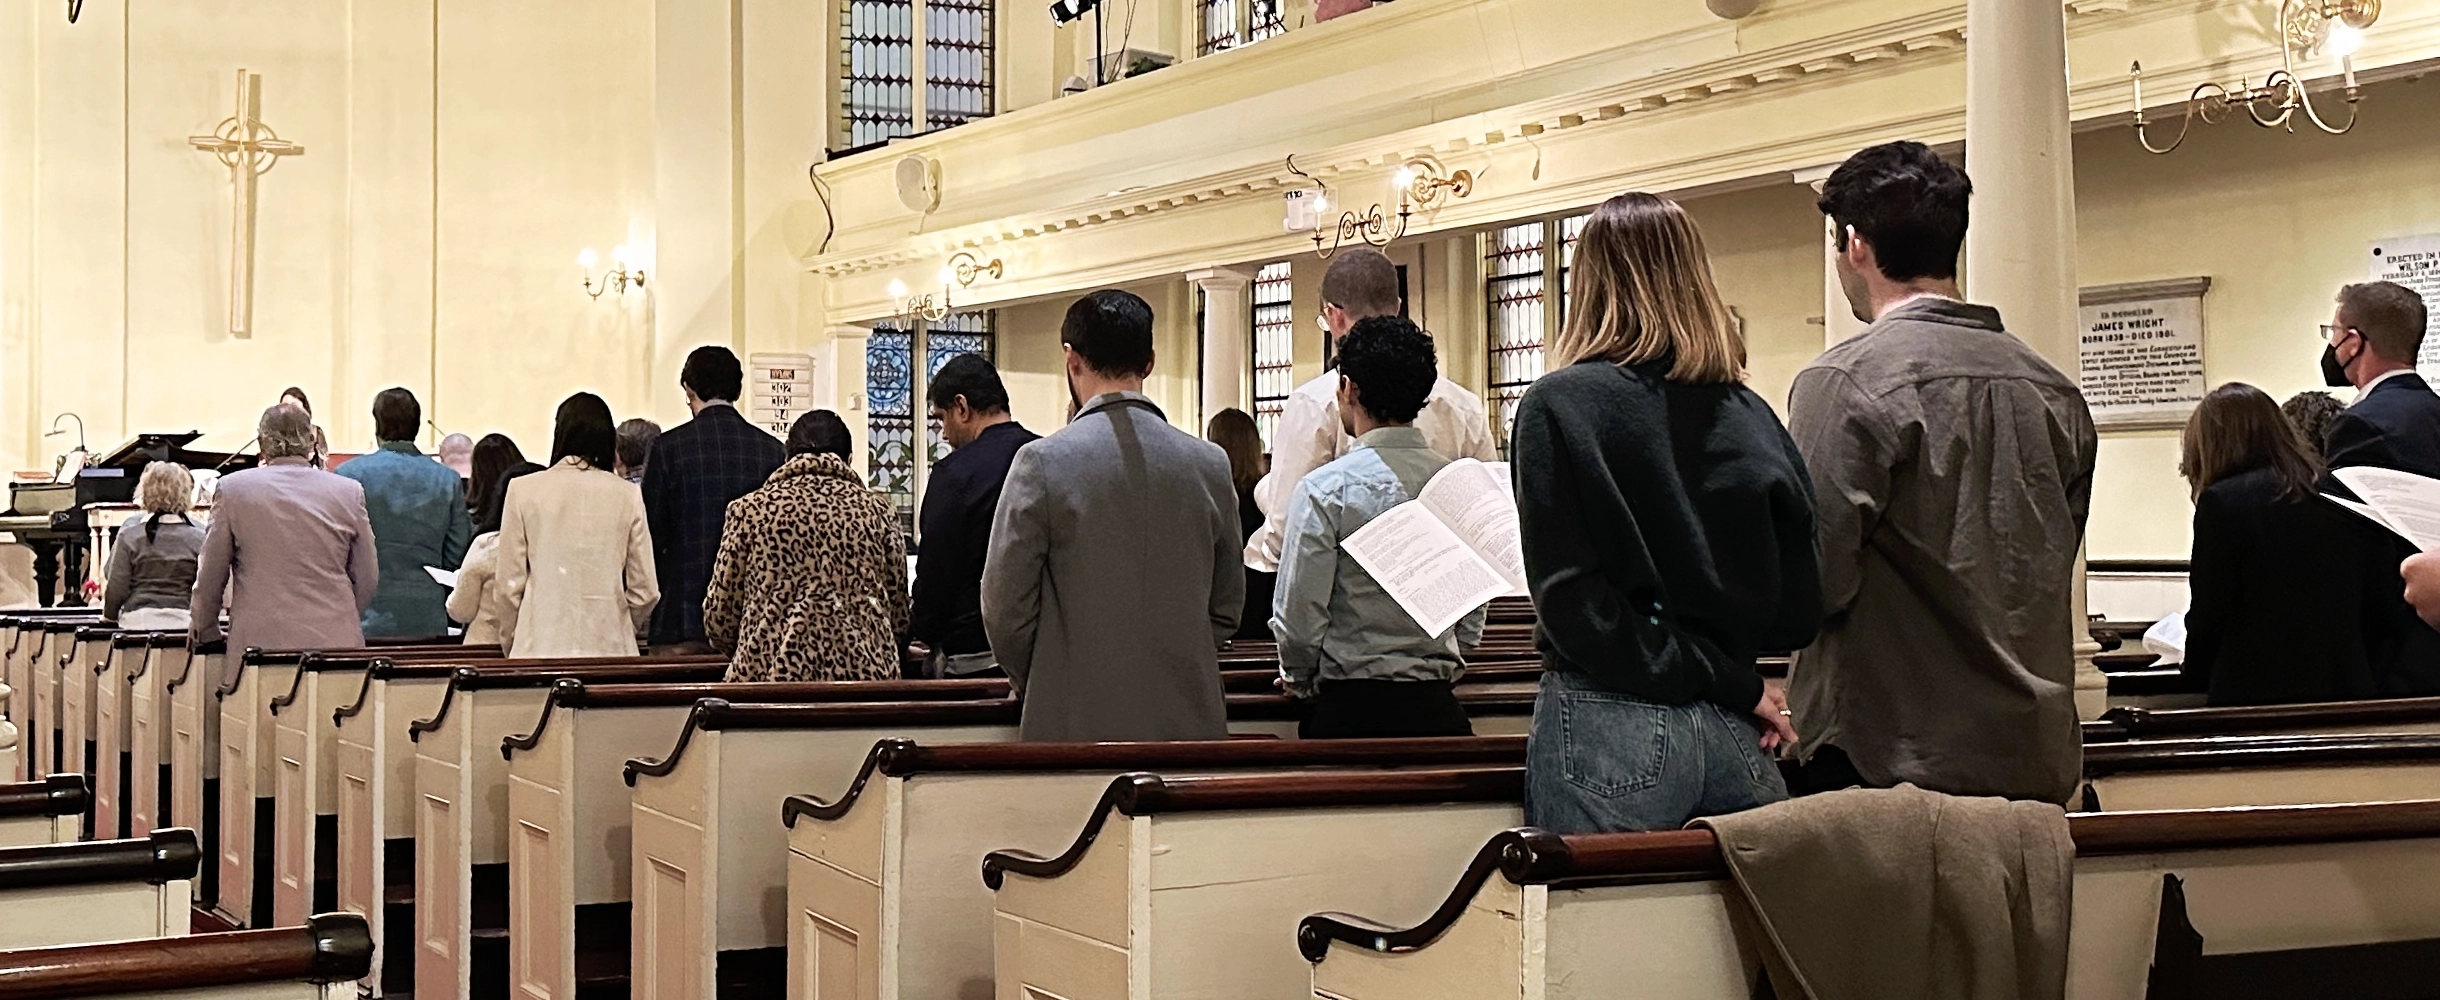 Photo of people in church